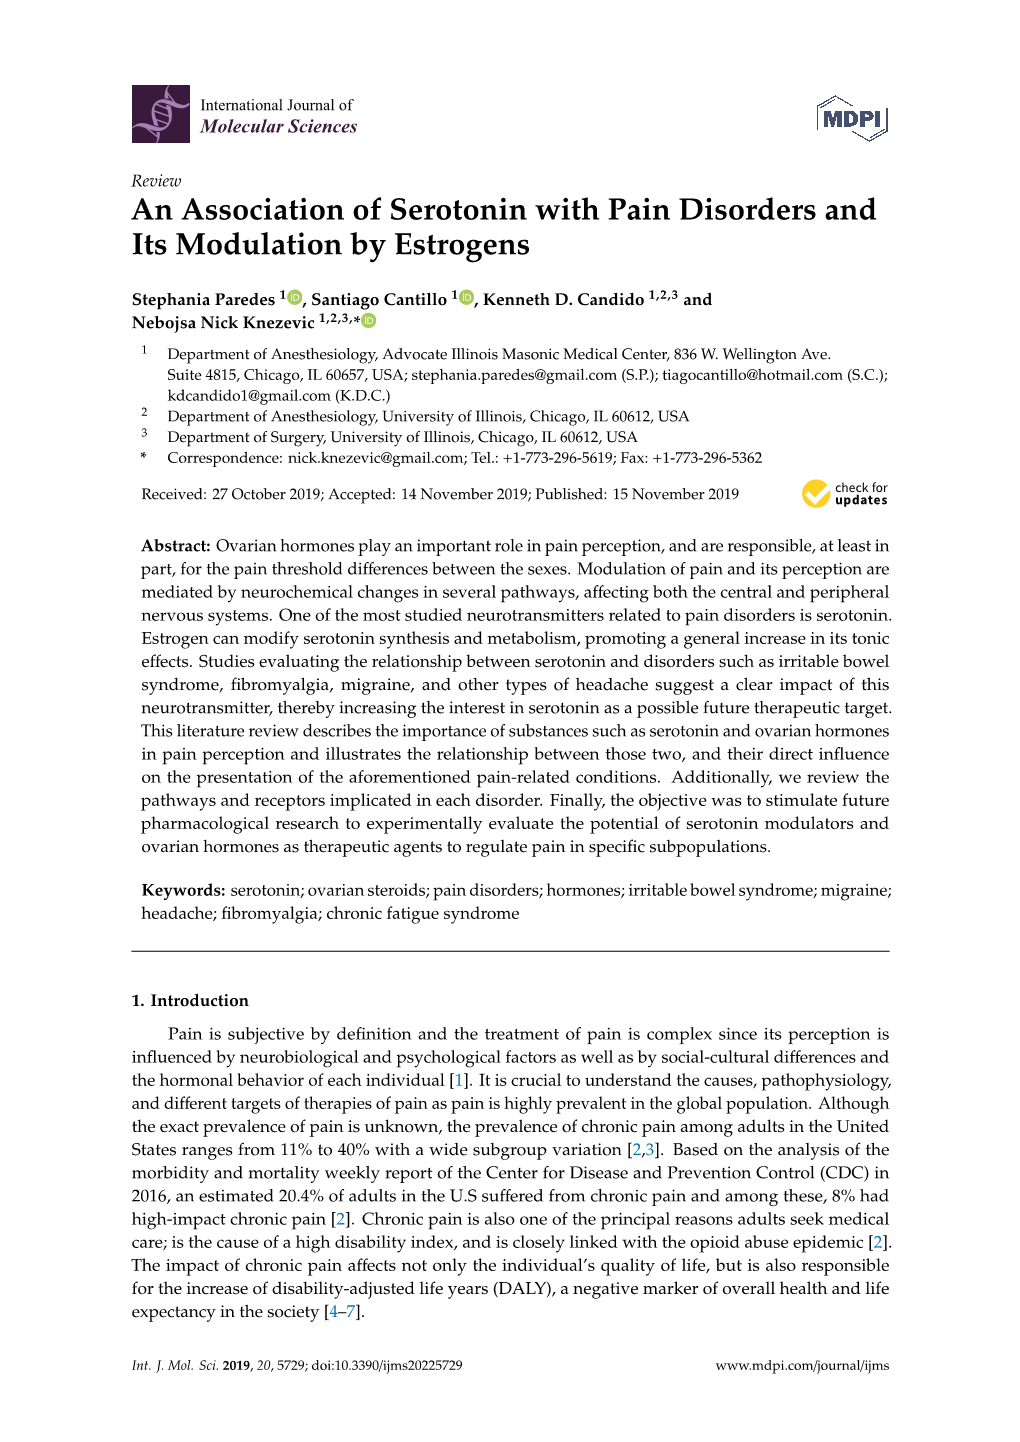 An Association of Serotonin with Pain Disorders and Its Modulation by Estrogens